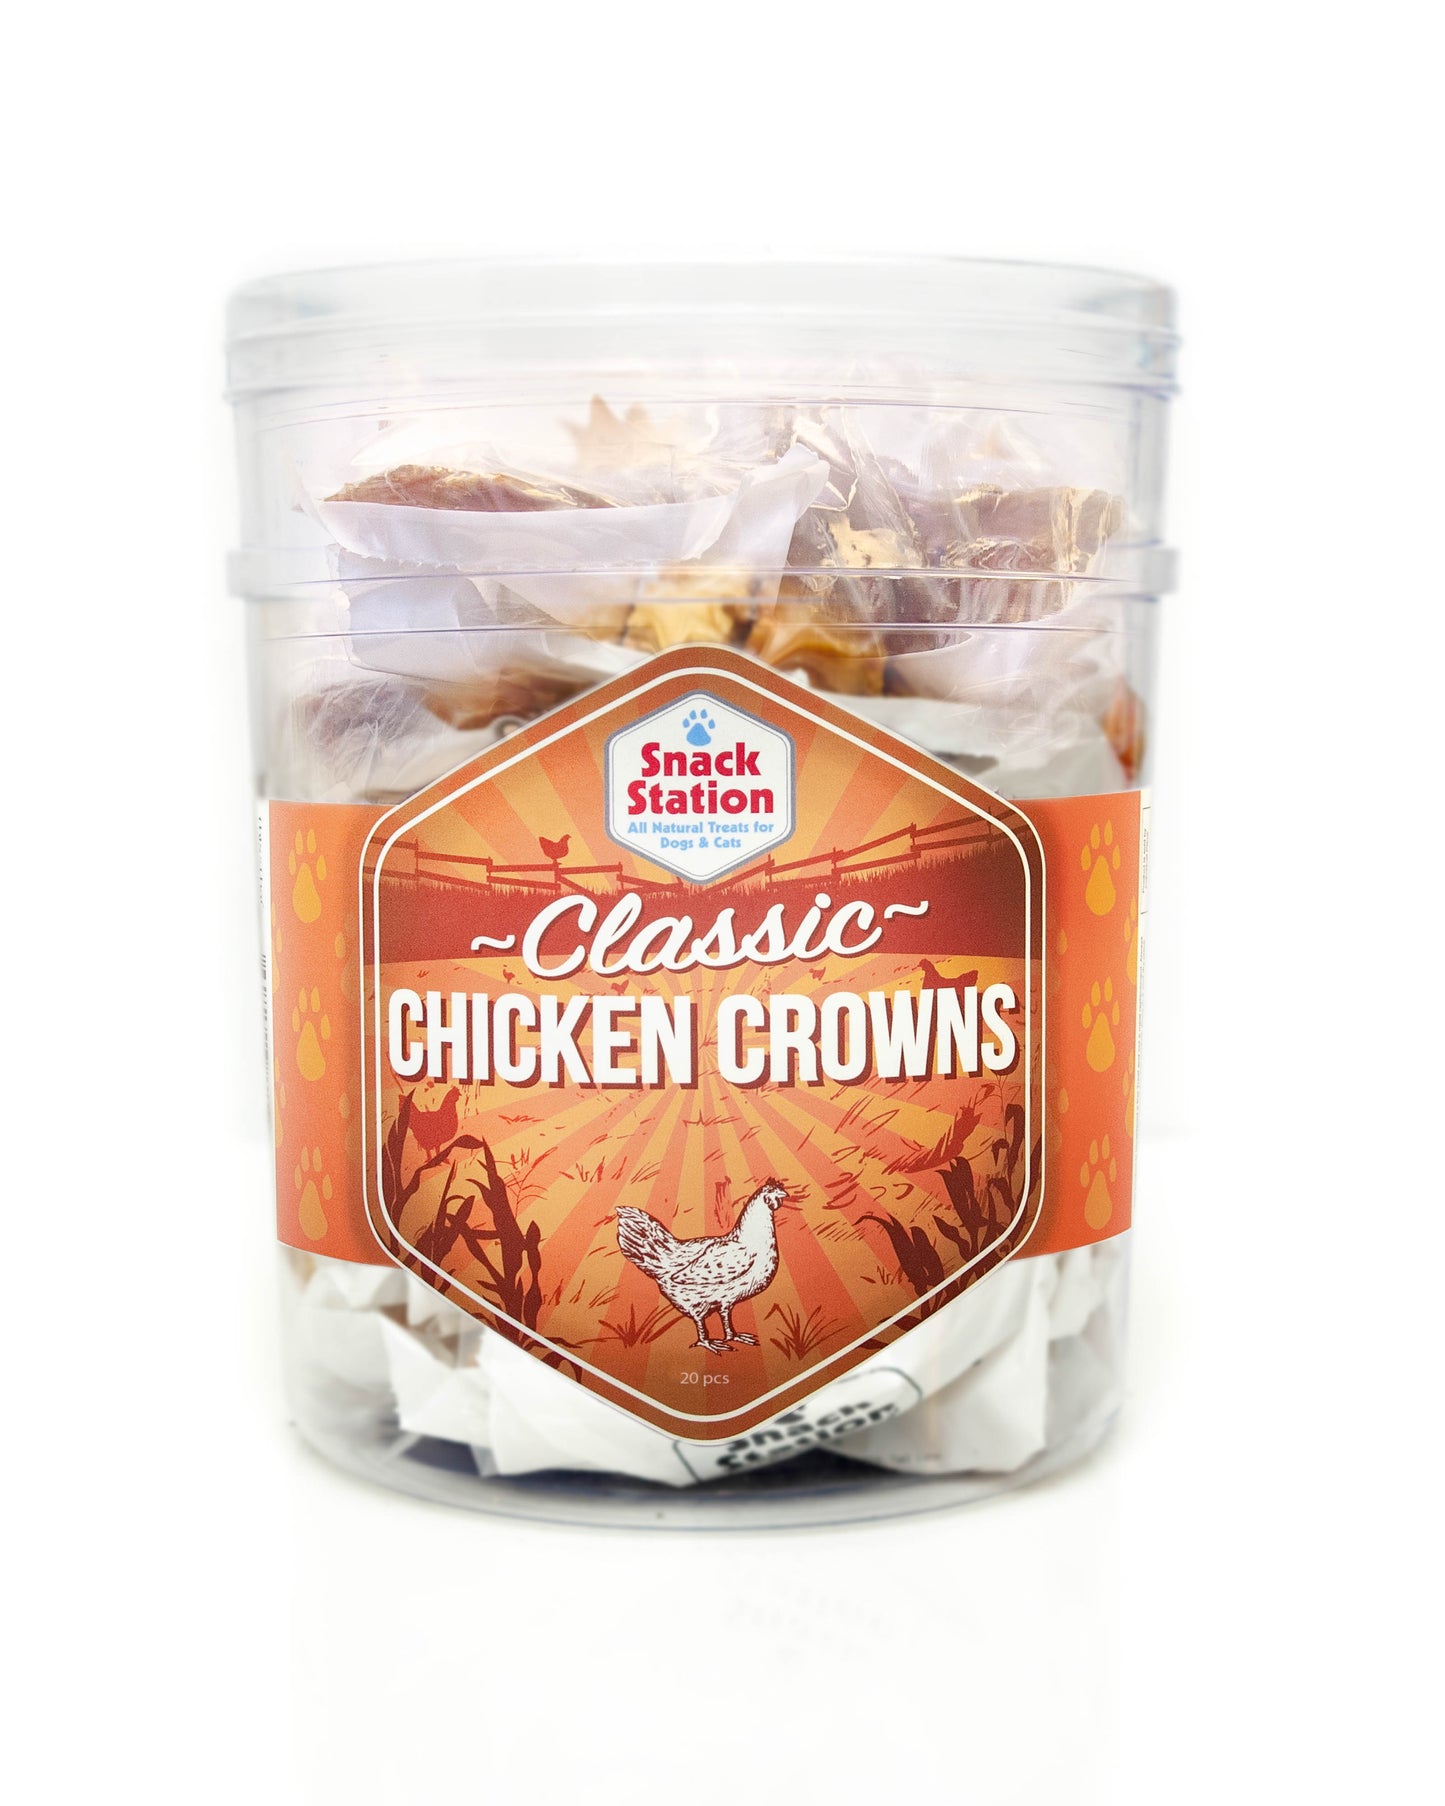 This & That Snack Station Classic Chicken Crowns